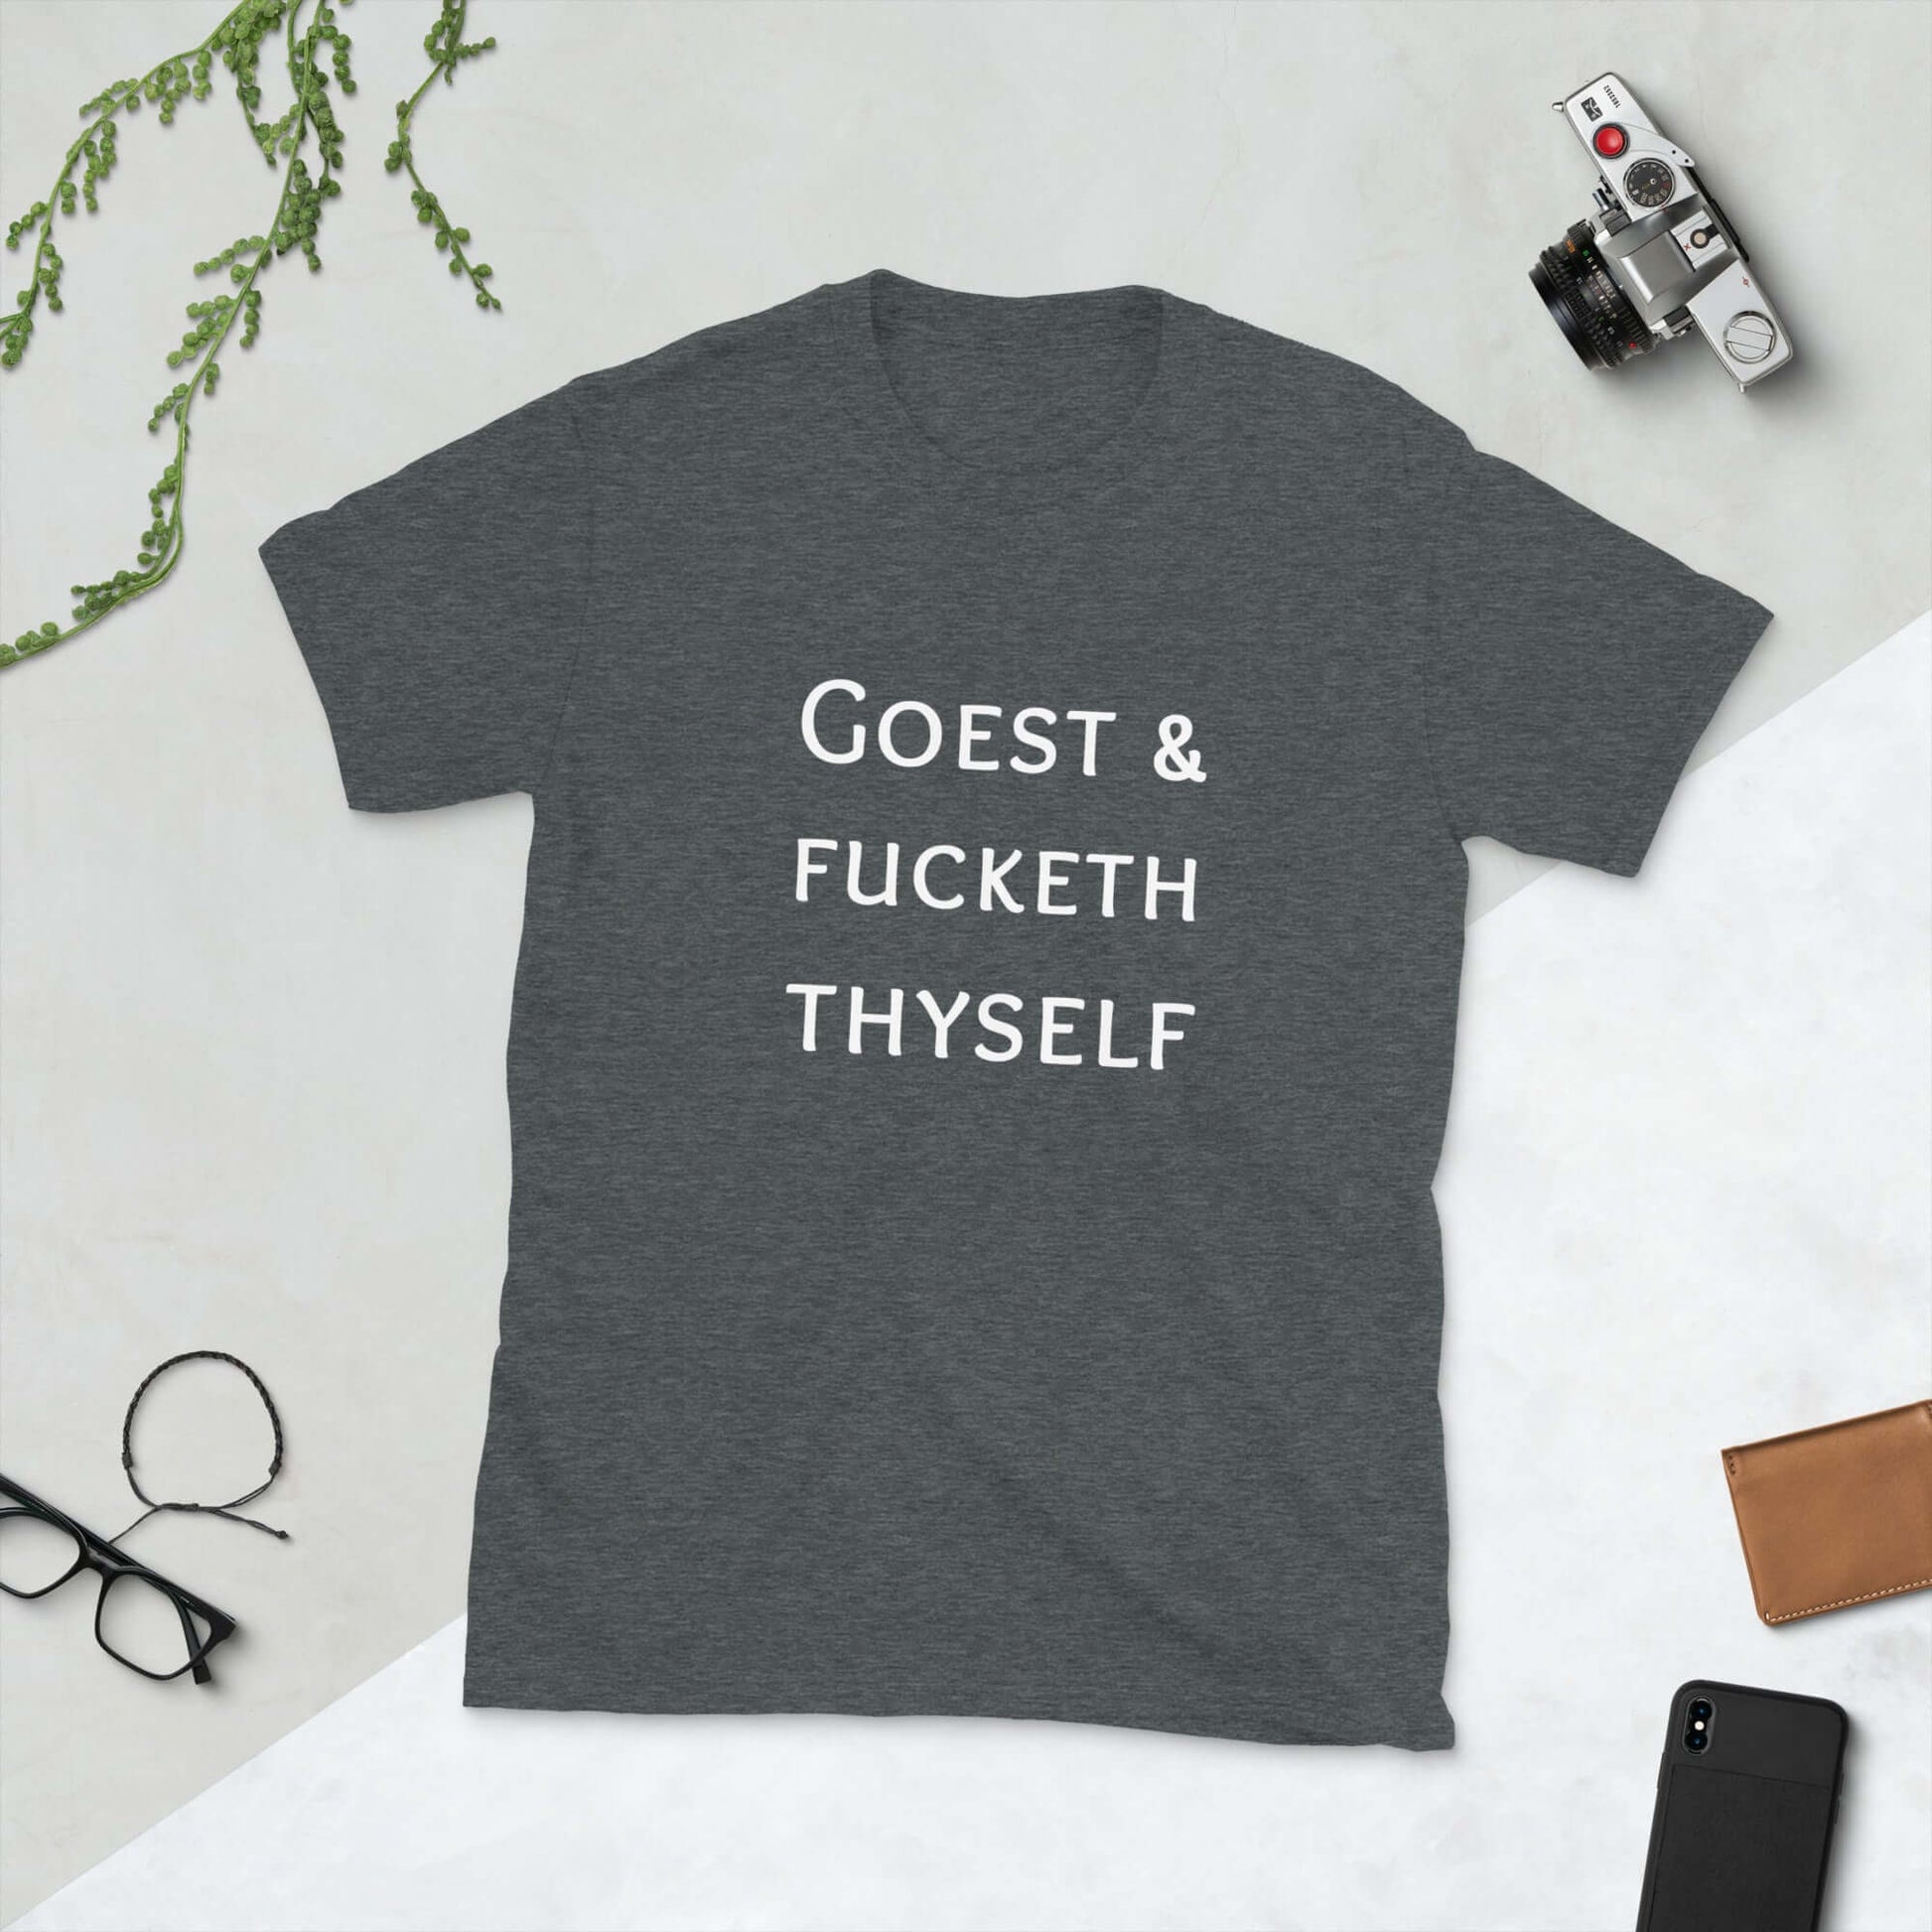 Dark heather grey t-shirt with the words Goest and fucketh thyself printed on the front.